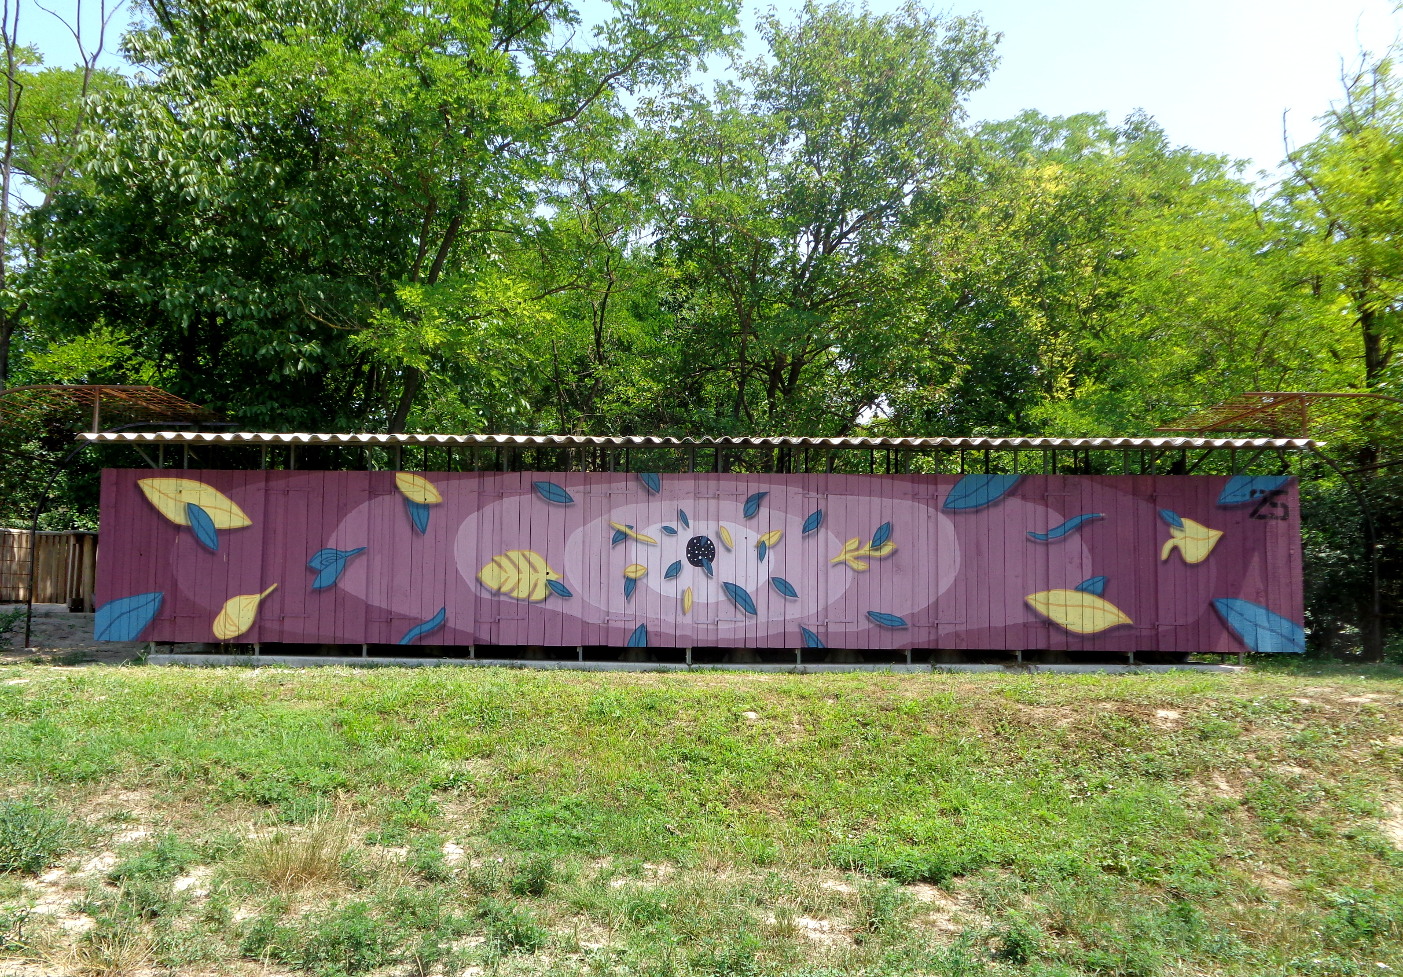  Mural commissioned by Ozora Festival, 2017 